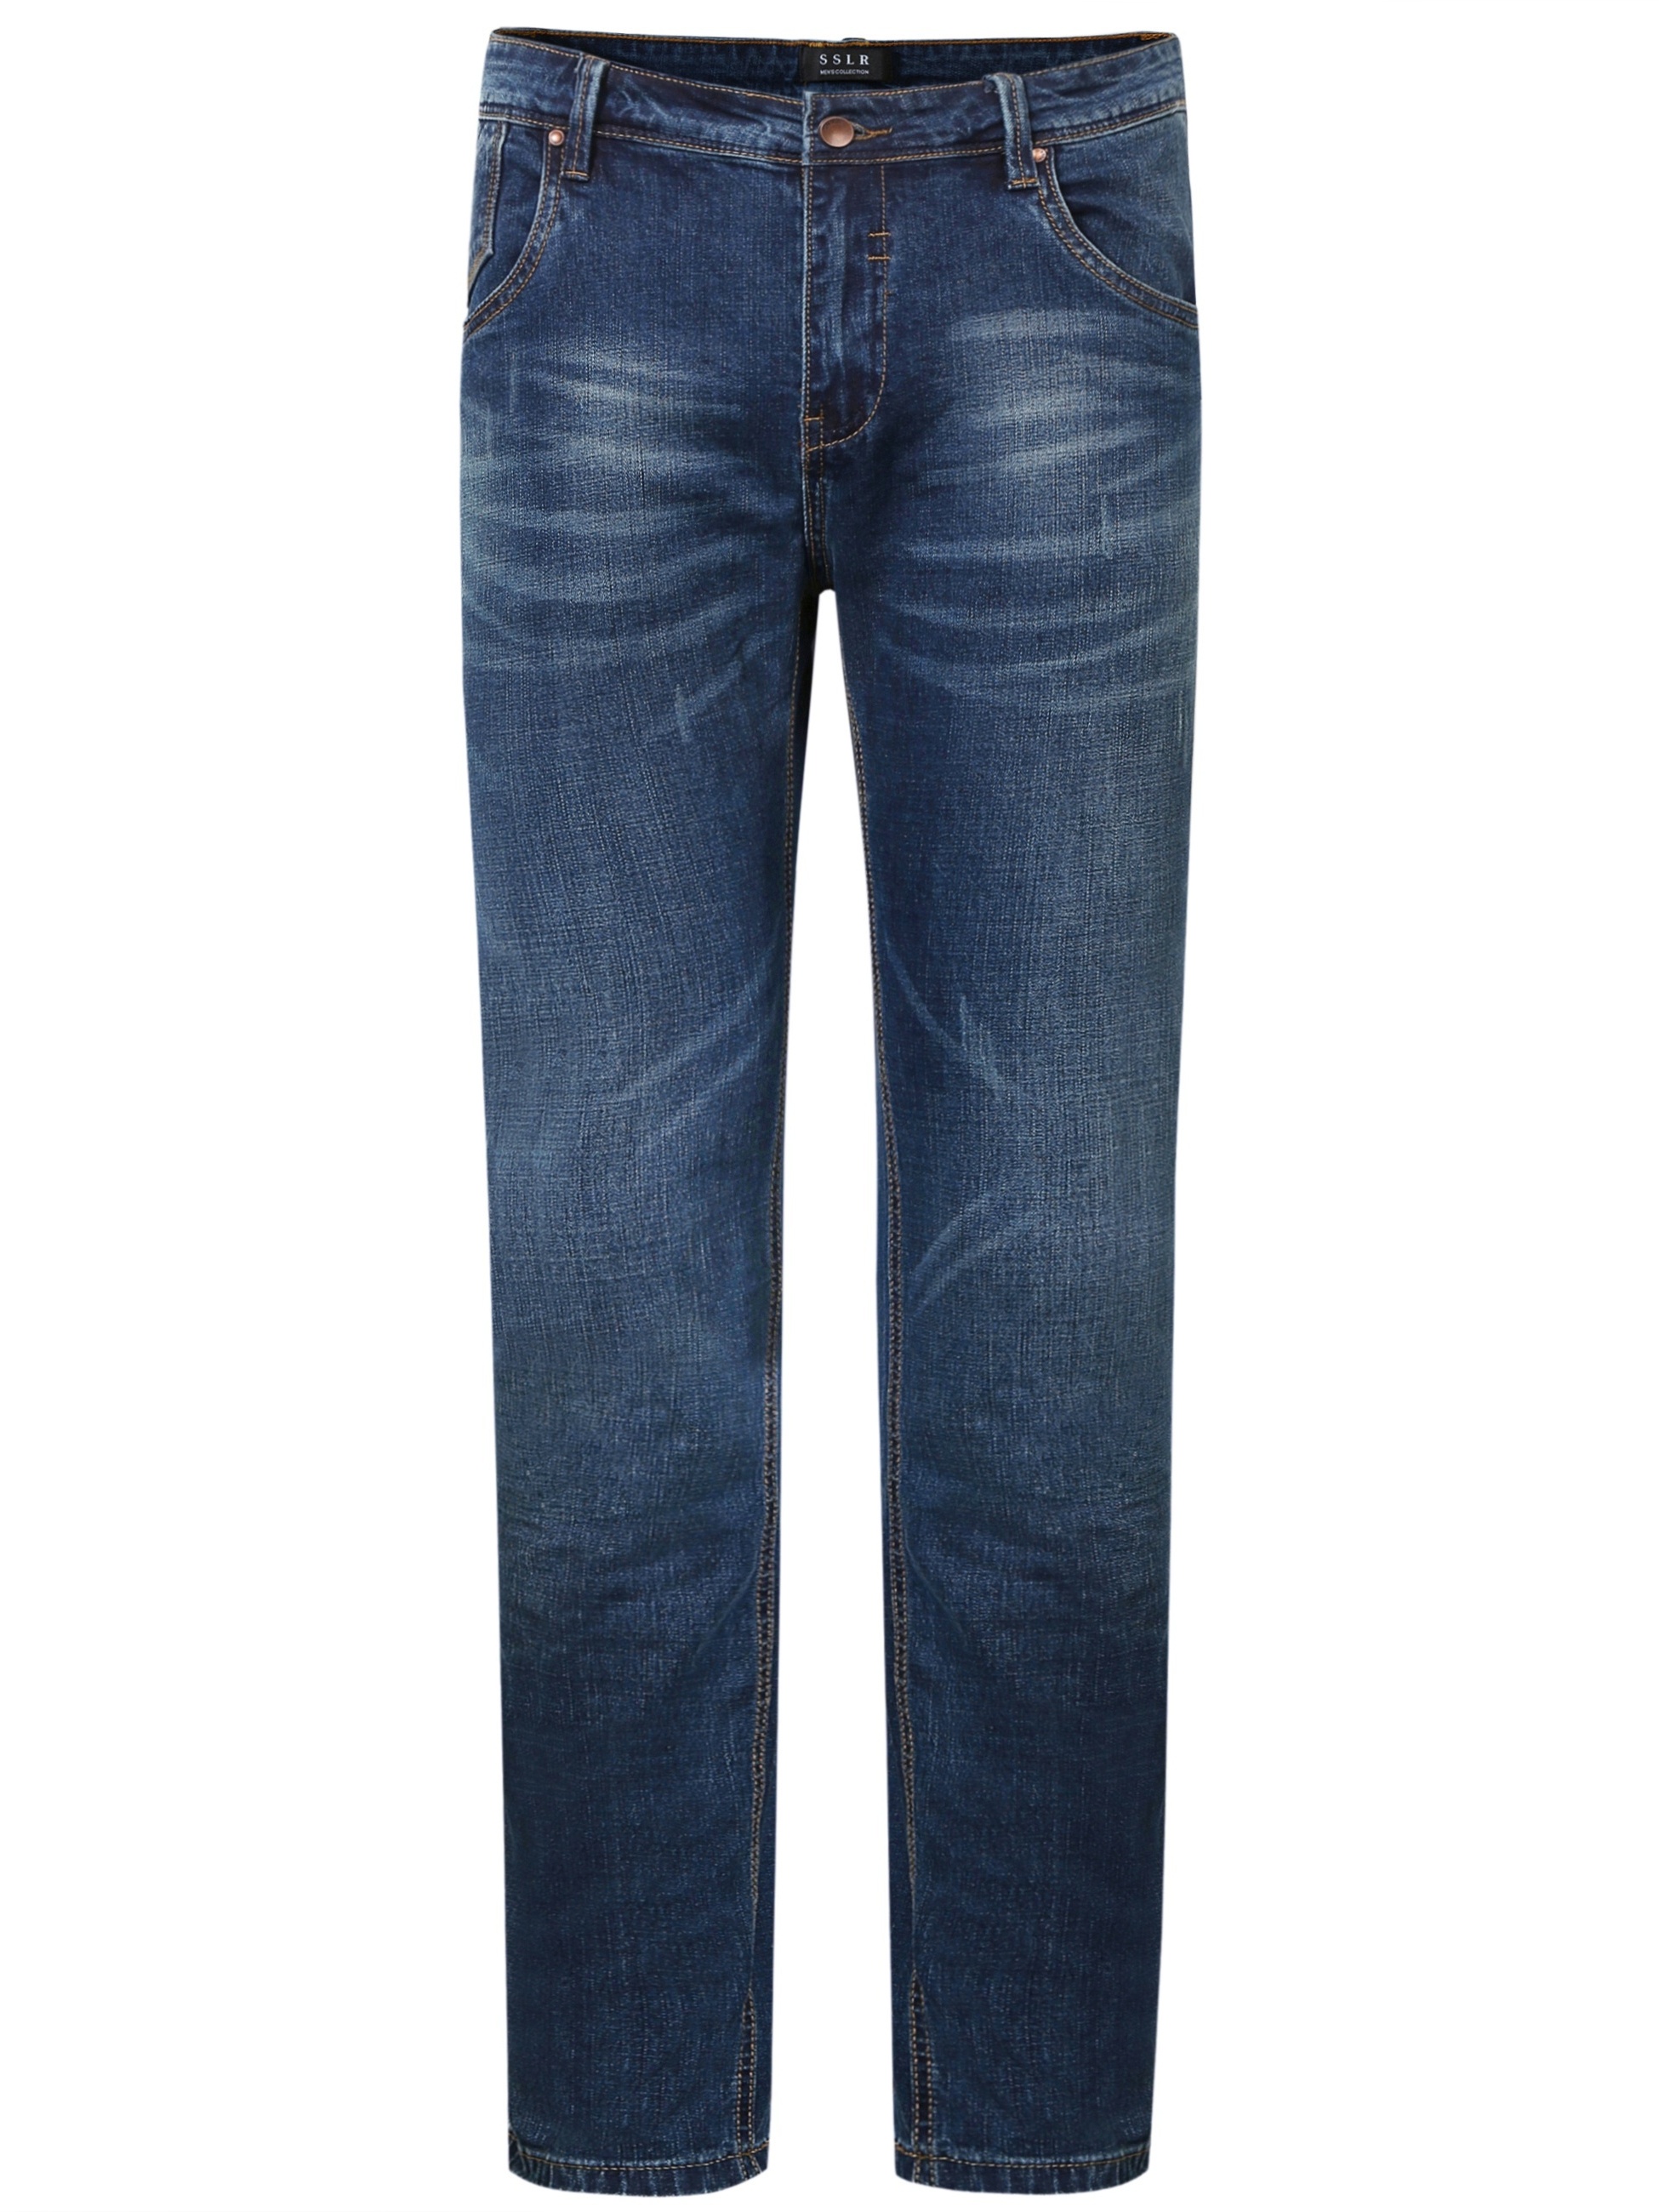 Womens Fleece Lined Relaxed Fit Jeans, Straight Leg